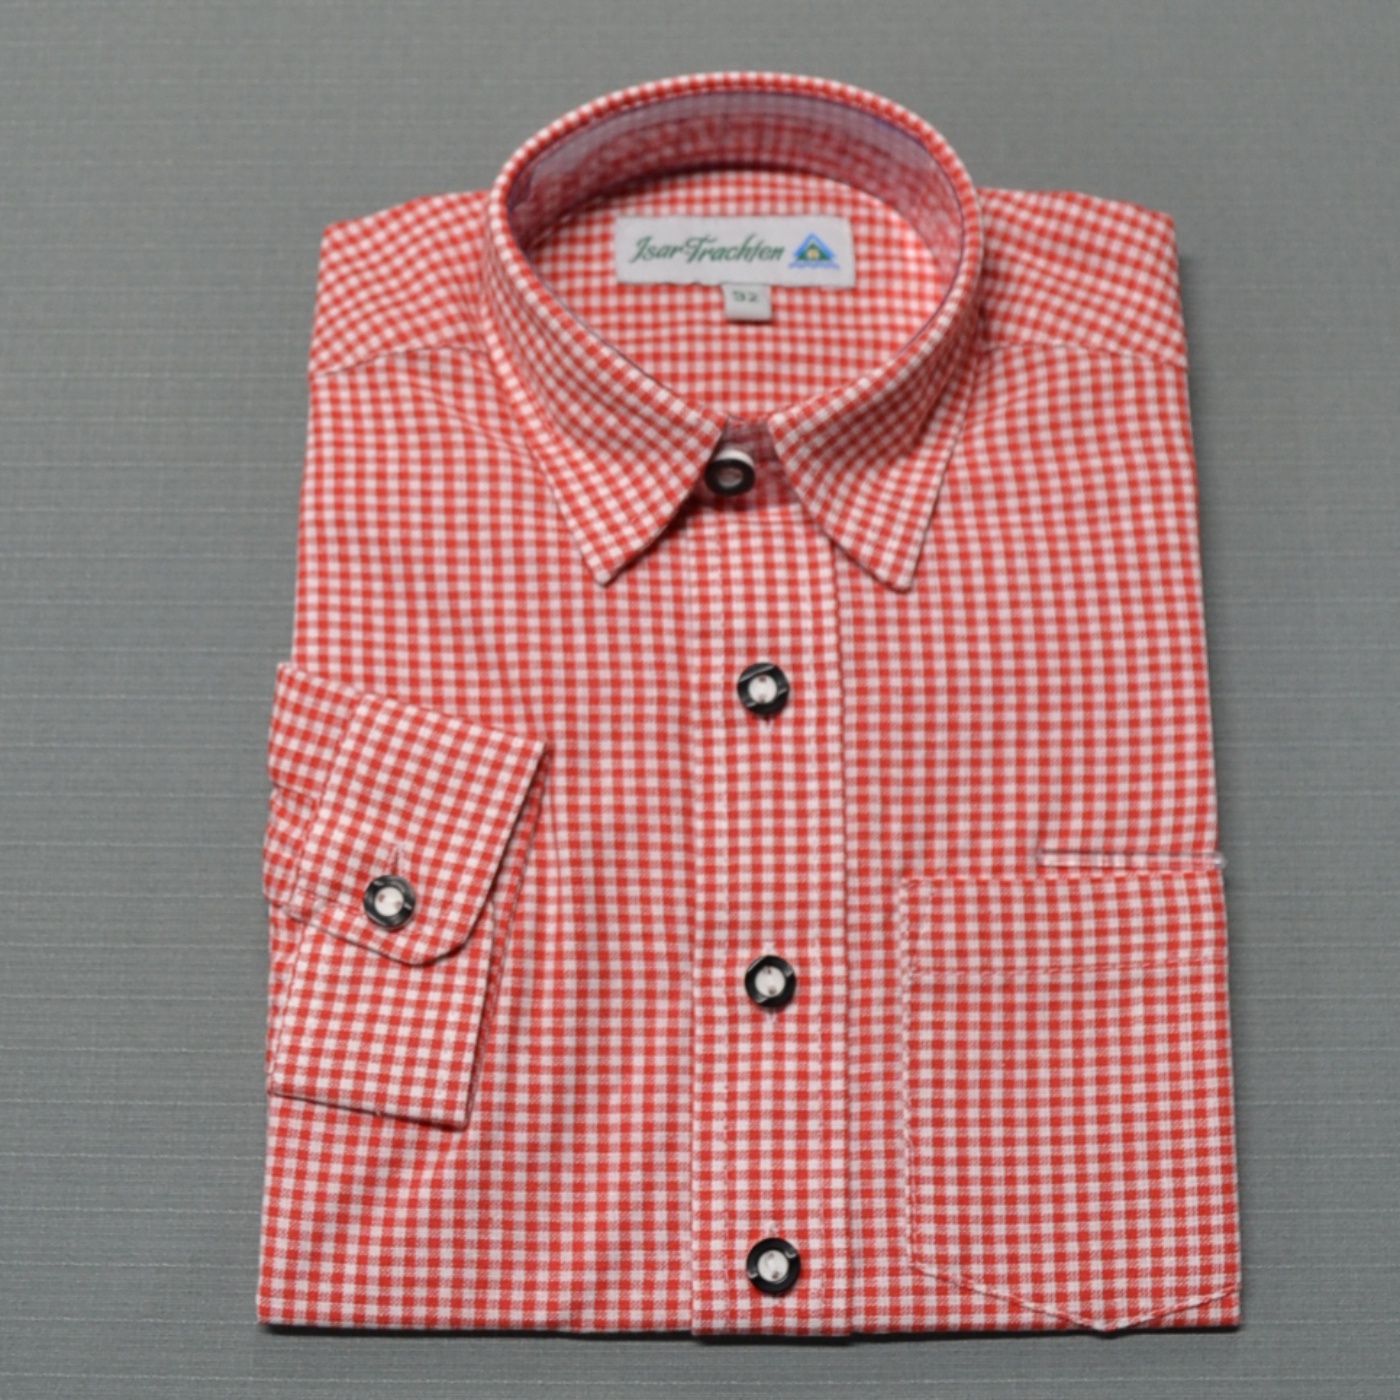 Boy's Red and White Checkered Shirt Sizes 5 through 14 - Made in ...